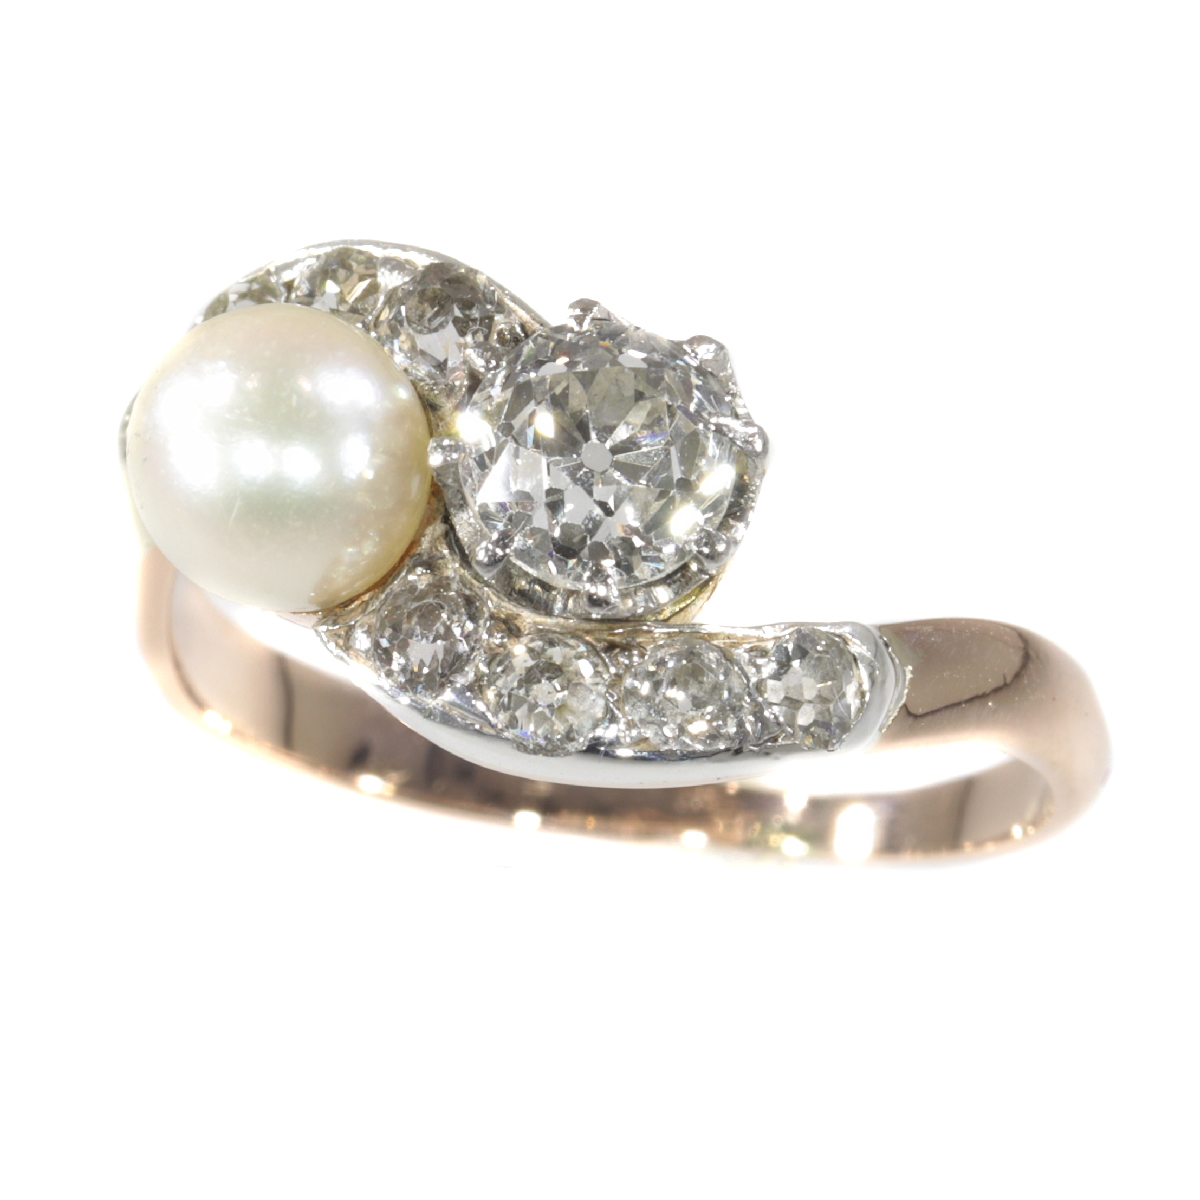 Victorian diamond and pearl engagement ring so-called romantic Toi et Moi